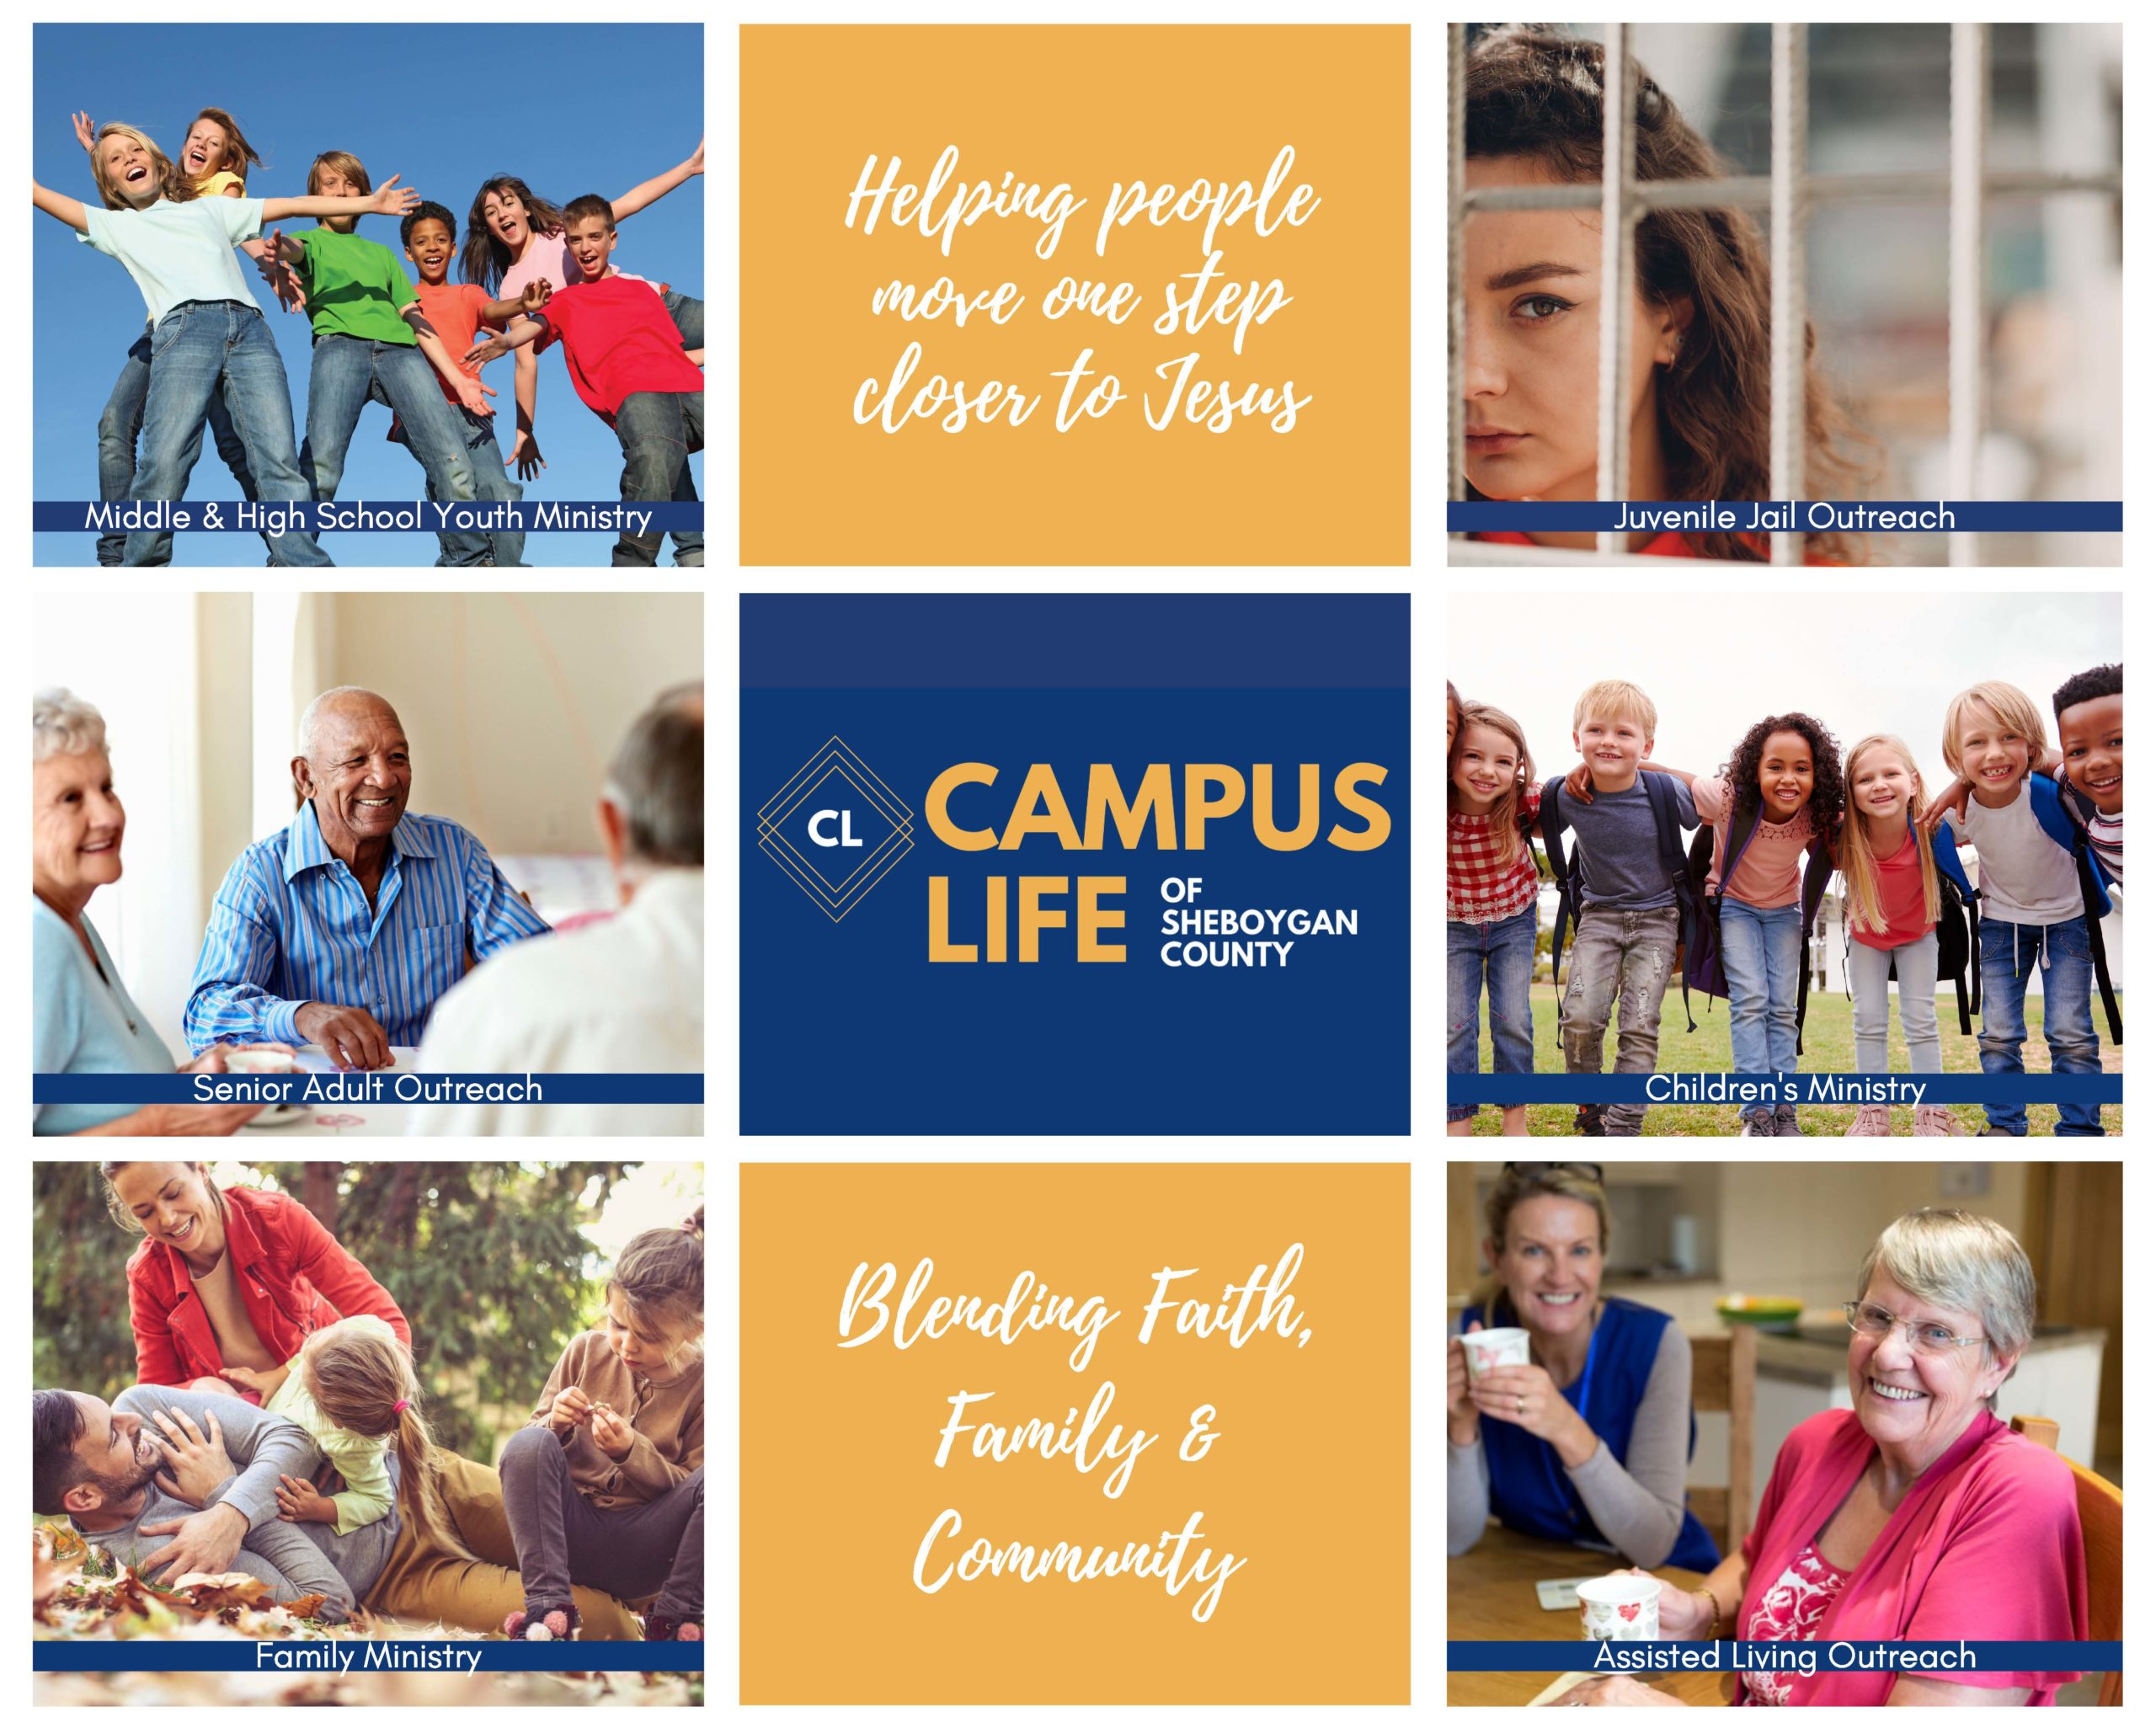 Campus Life for CCC Global Giving Photo Display - Jim Green